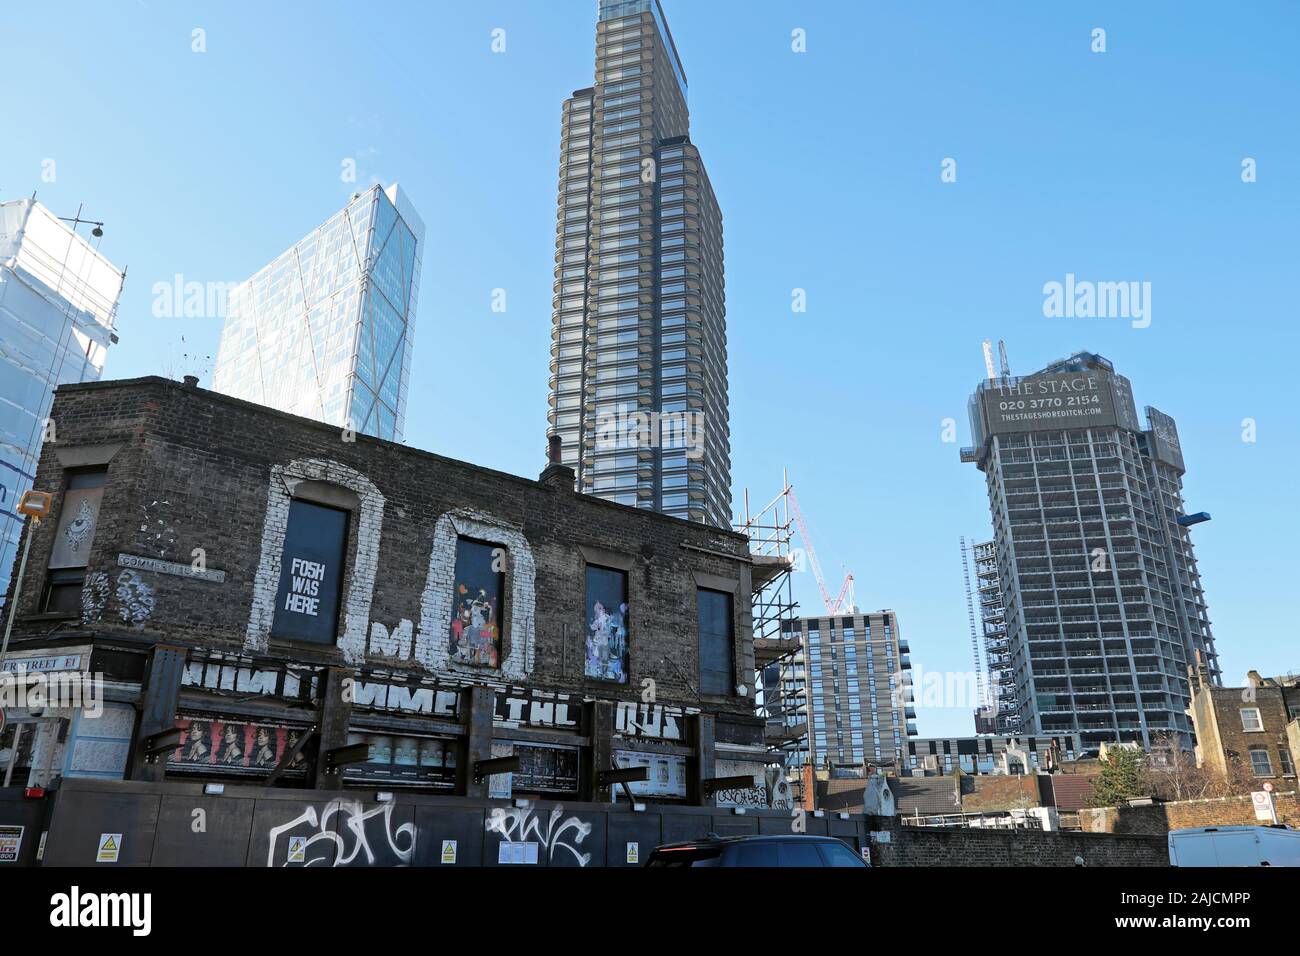 View of old & new buildings Principal Place & The Stage high rise residential tower under construction from Commercial Street London  UK KATHY DEWITT Stock Photo